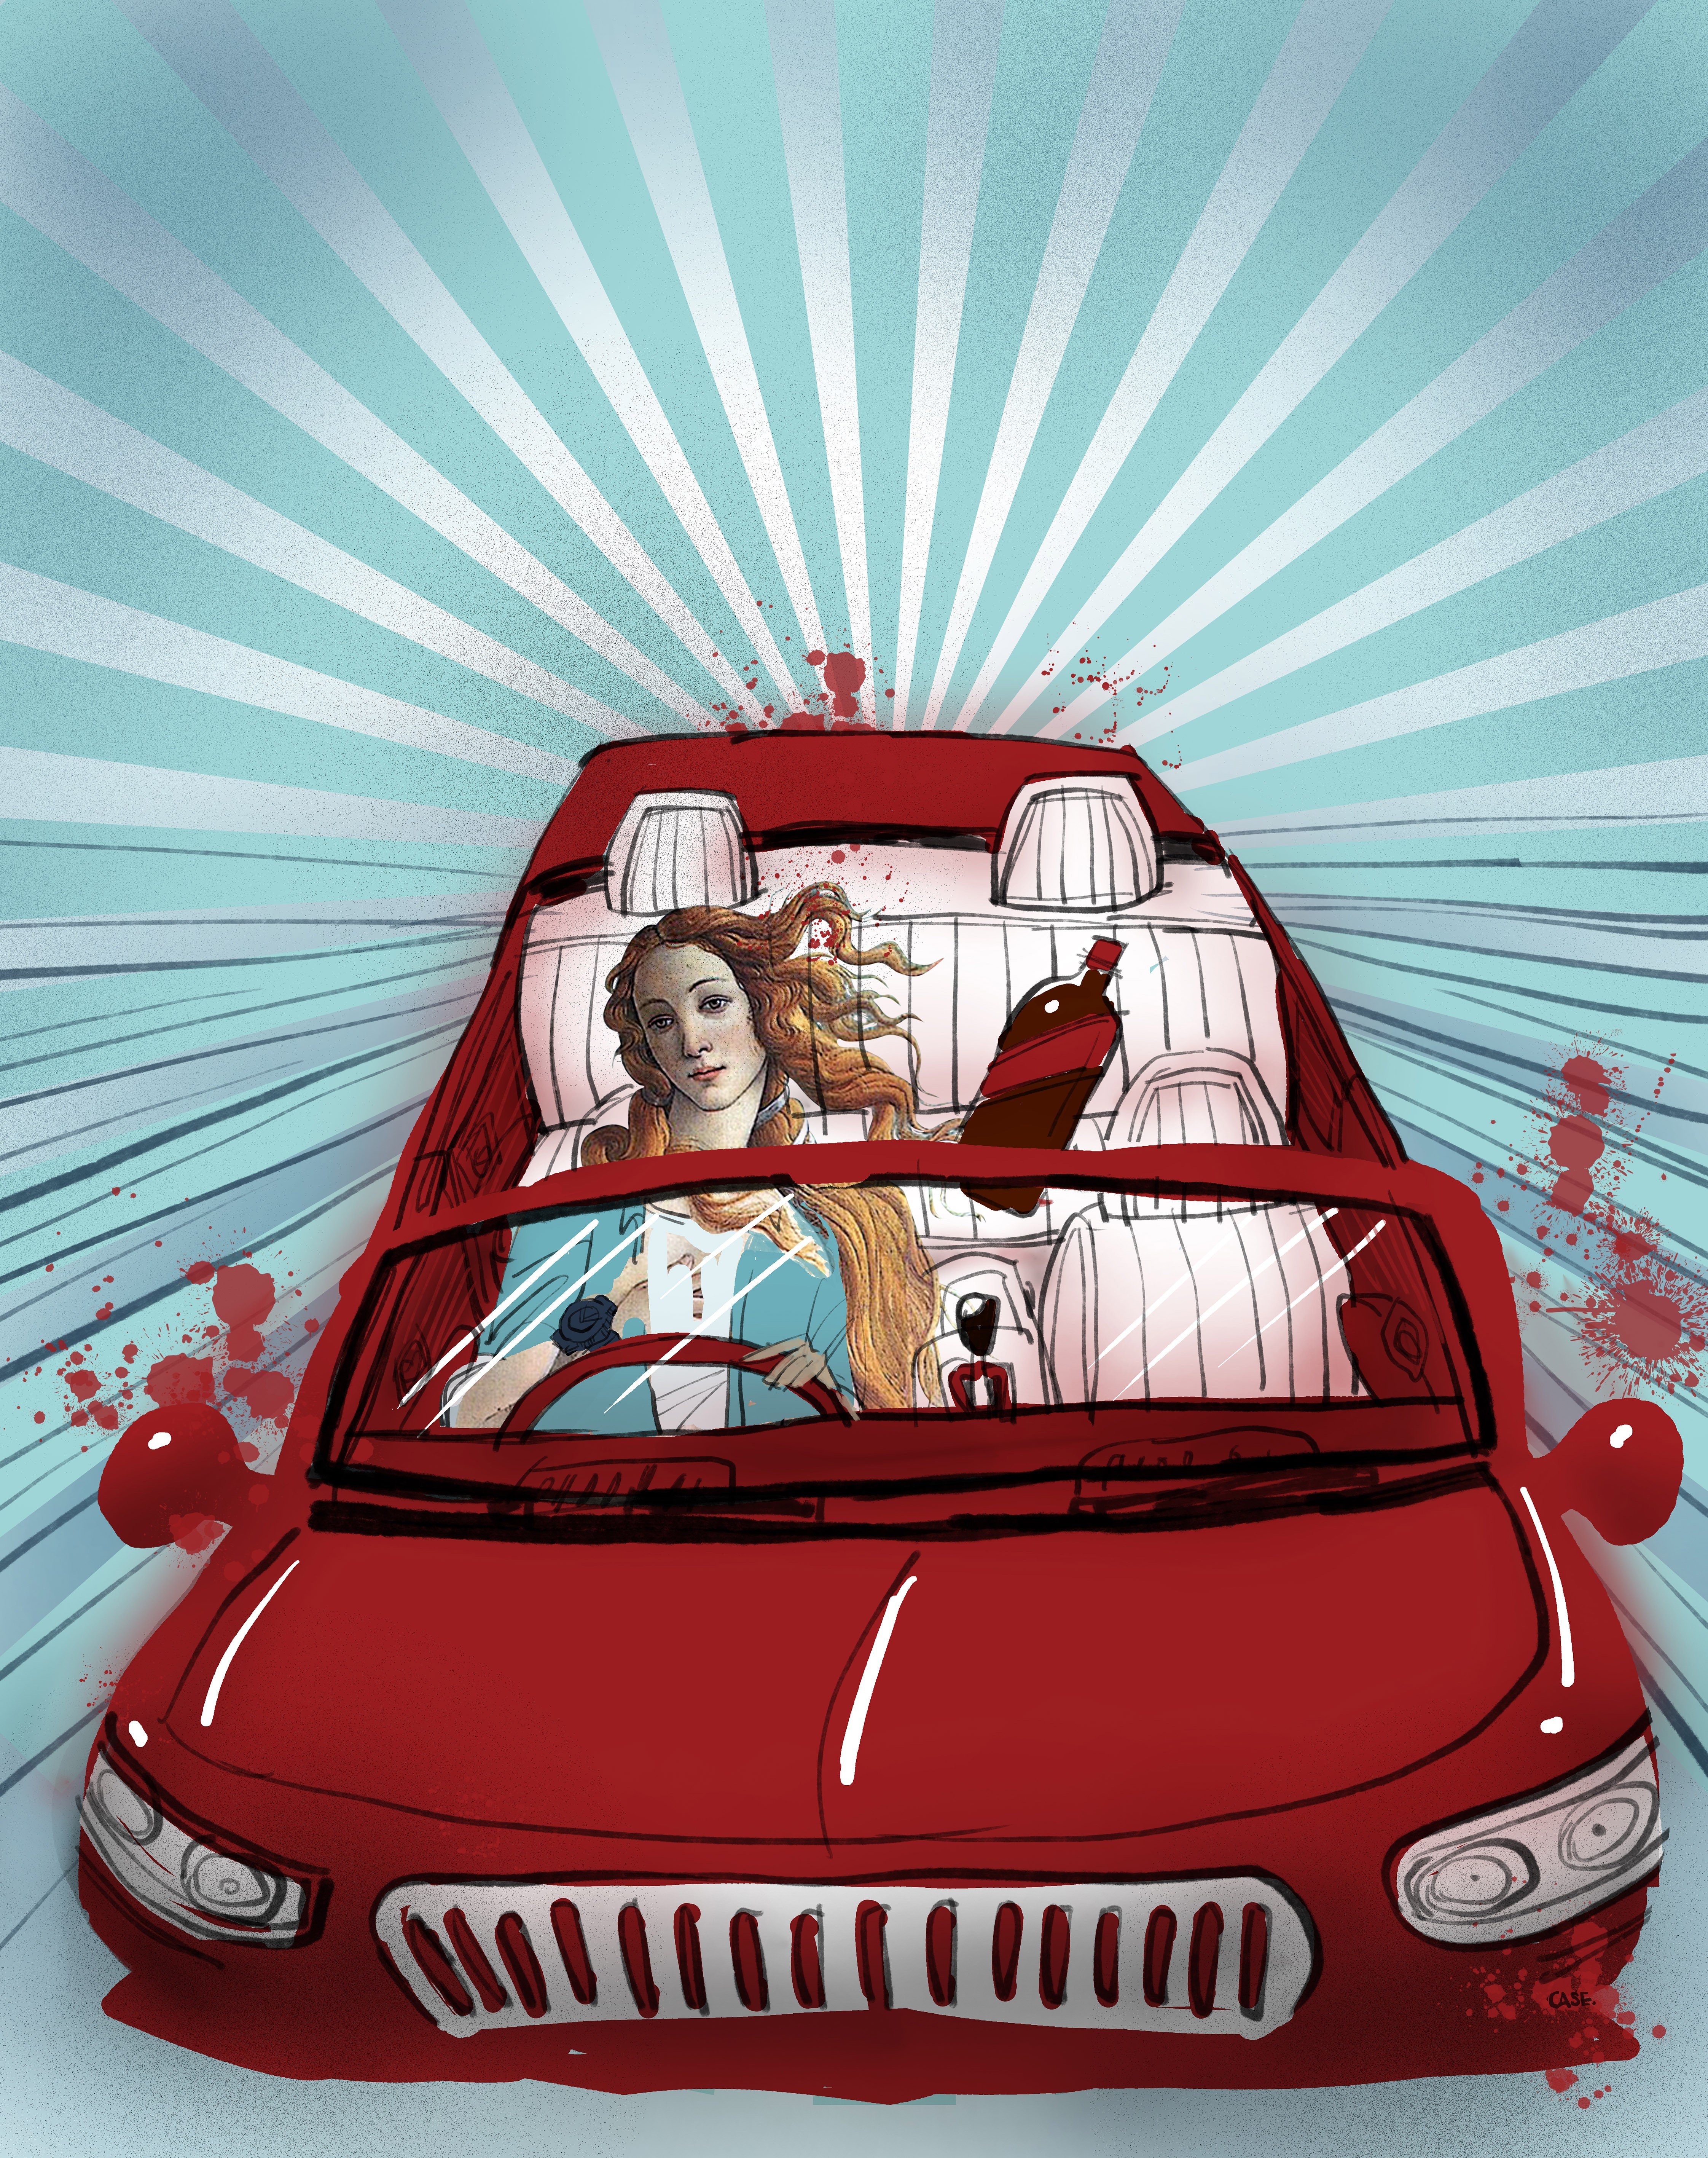 Women can also drink whisky or drive a sports car. Brands are trying to get rid of stereotypes as consumers become more socially aware. Illustration: Stephen Case